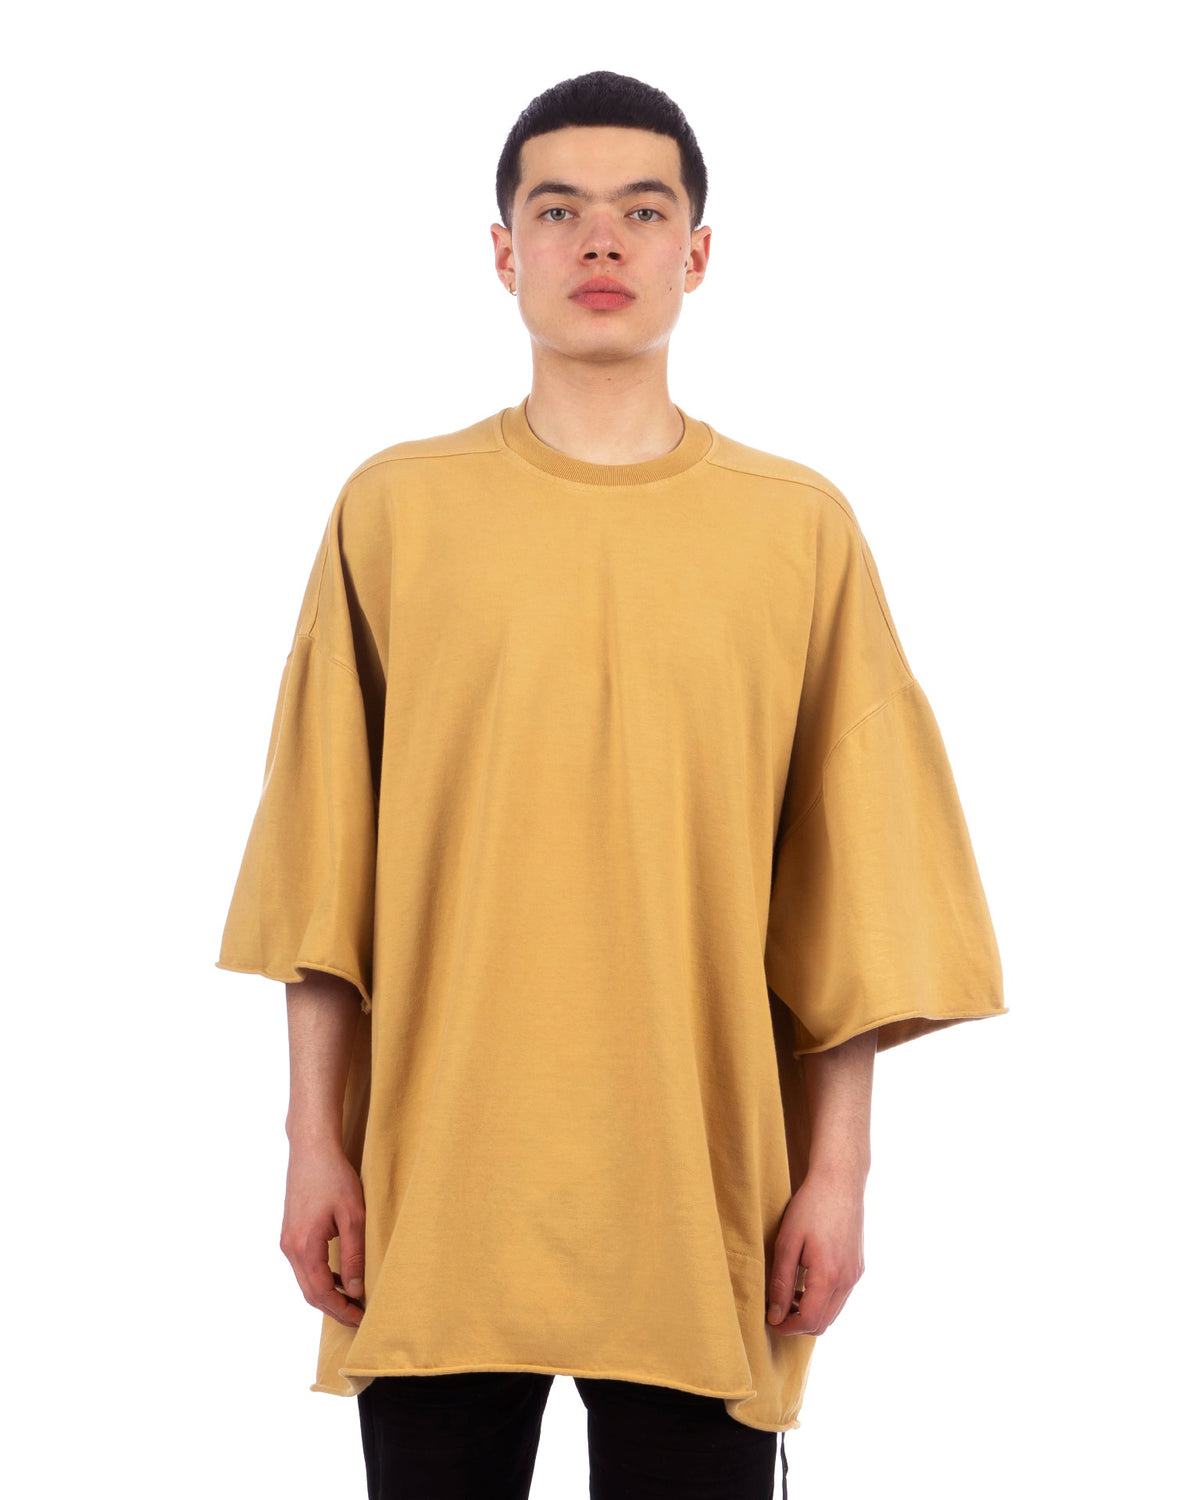 DRKSHDW by Rick Owens | Tommy T Mustard - Concrete